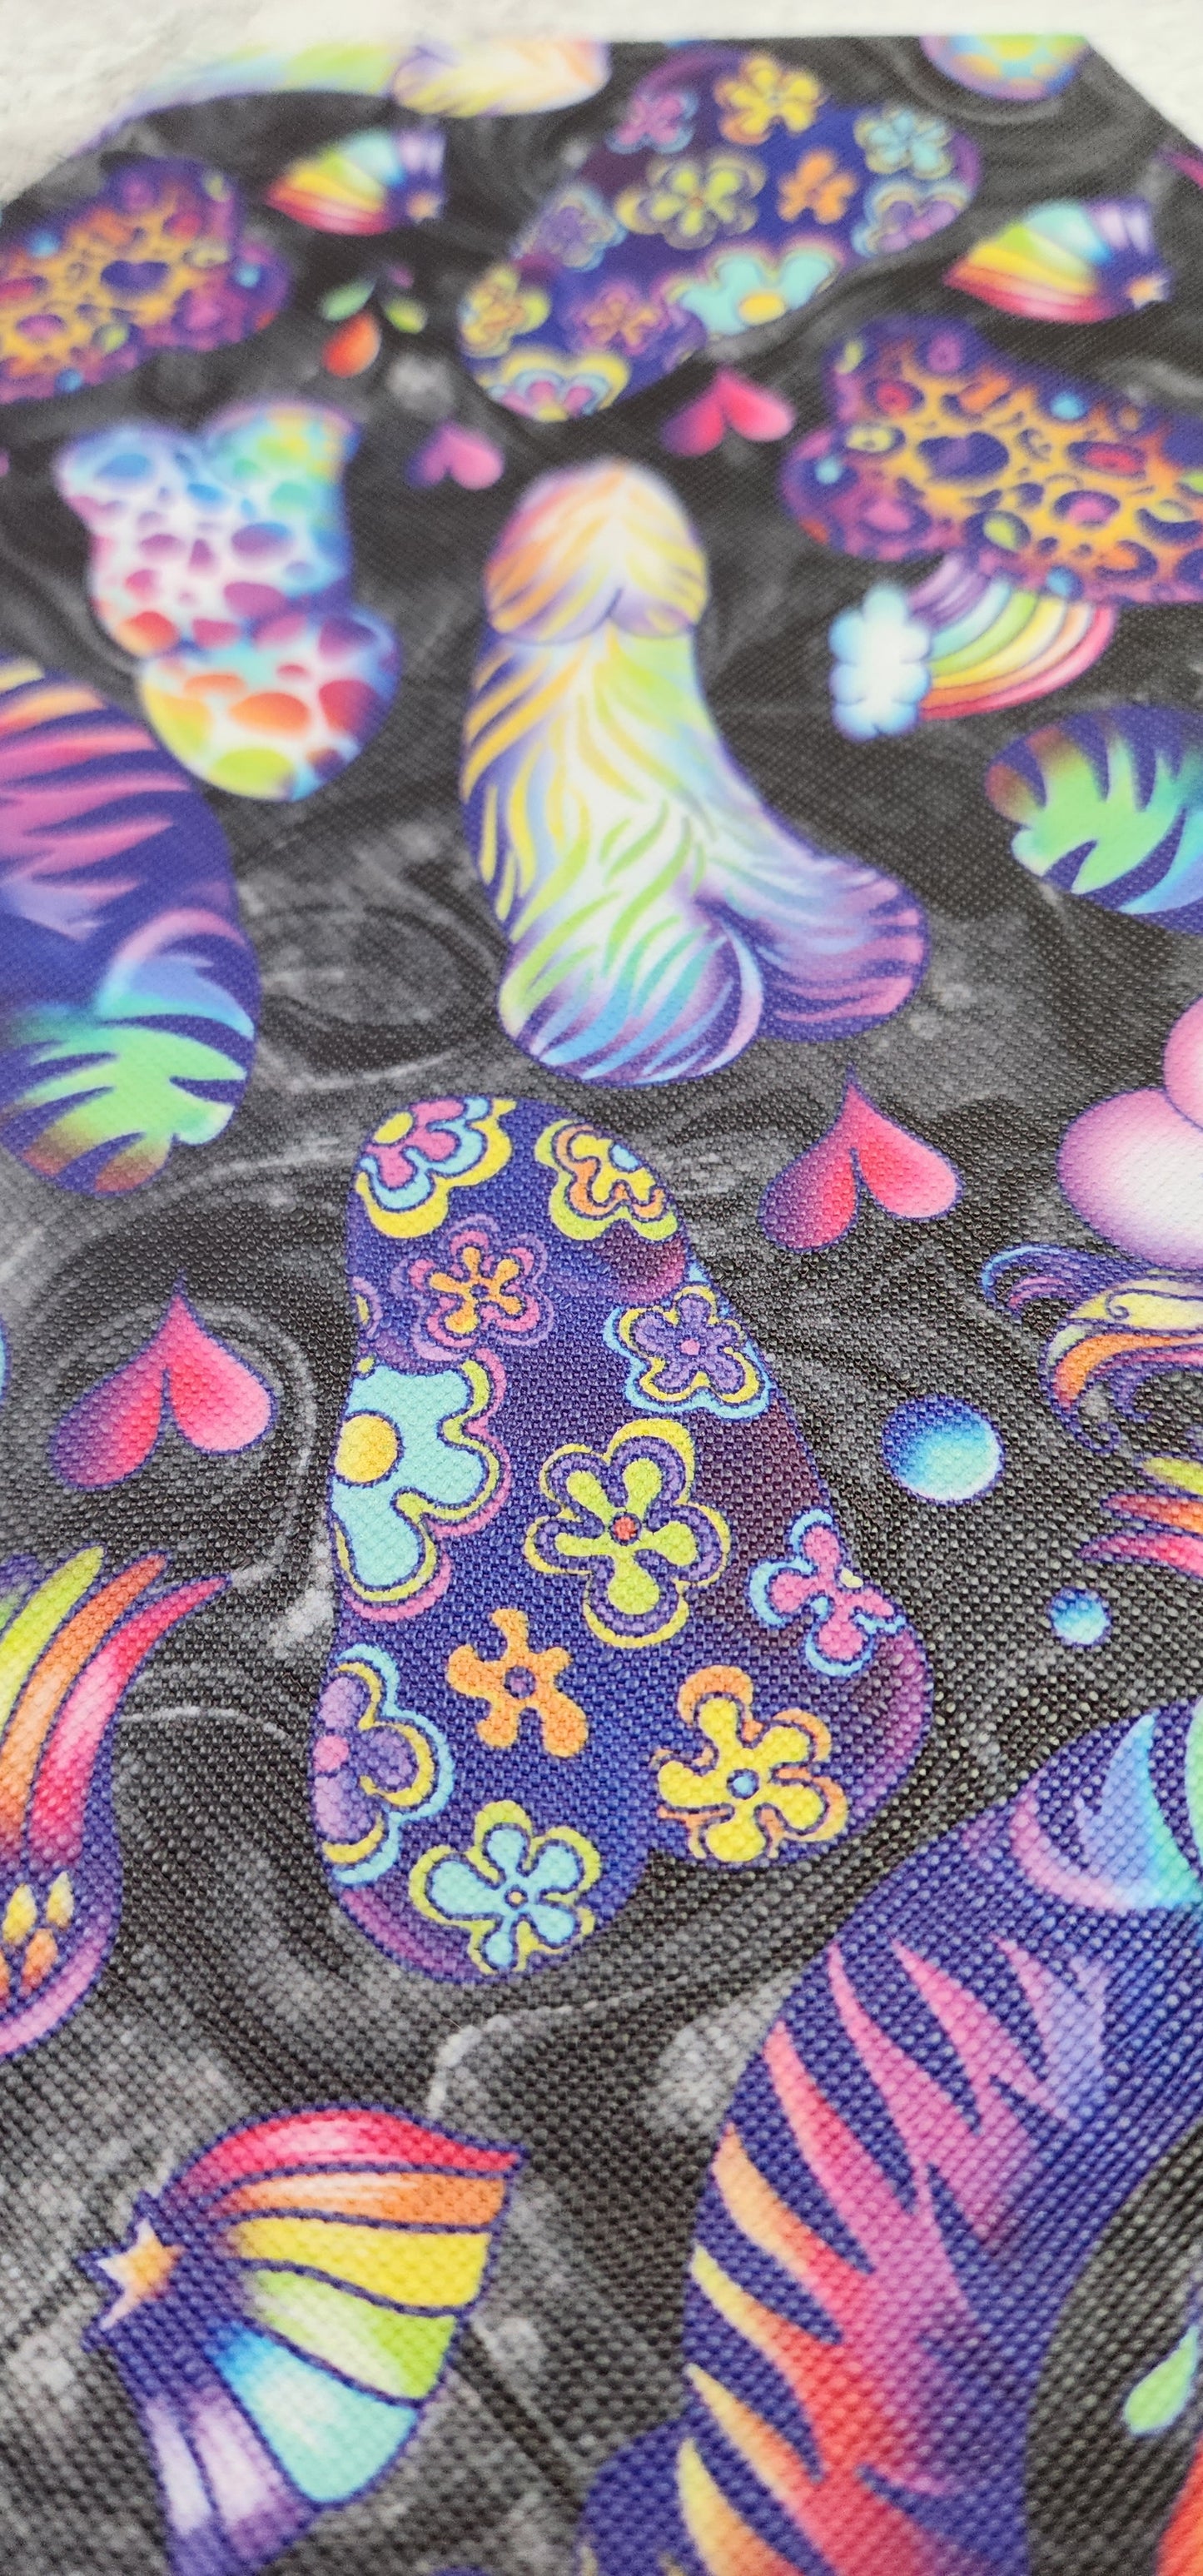 CUSTOM | Lisa Frank Inspired Peens, Small Scale, Coffin Wristlet Clutch | Vinyl & Cotton Pouch | Optional Add on's | Bag, Wallet, Purse